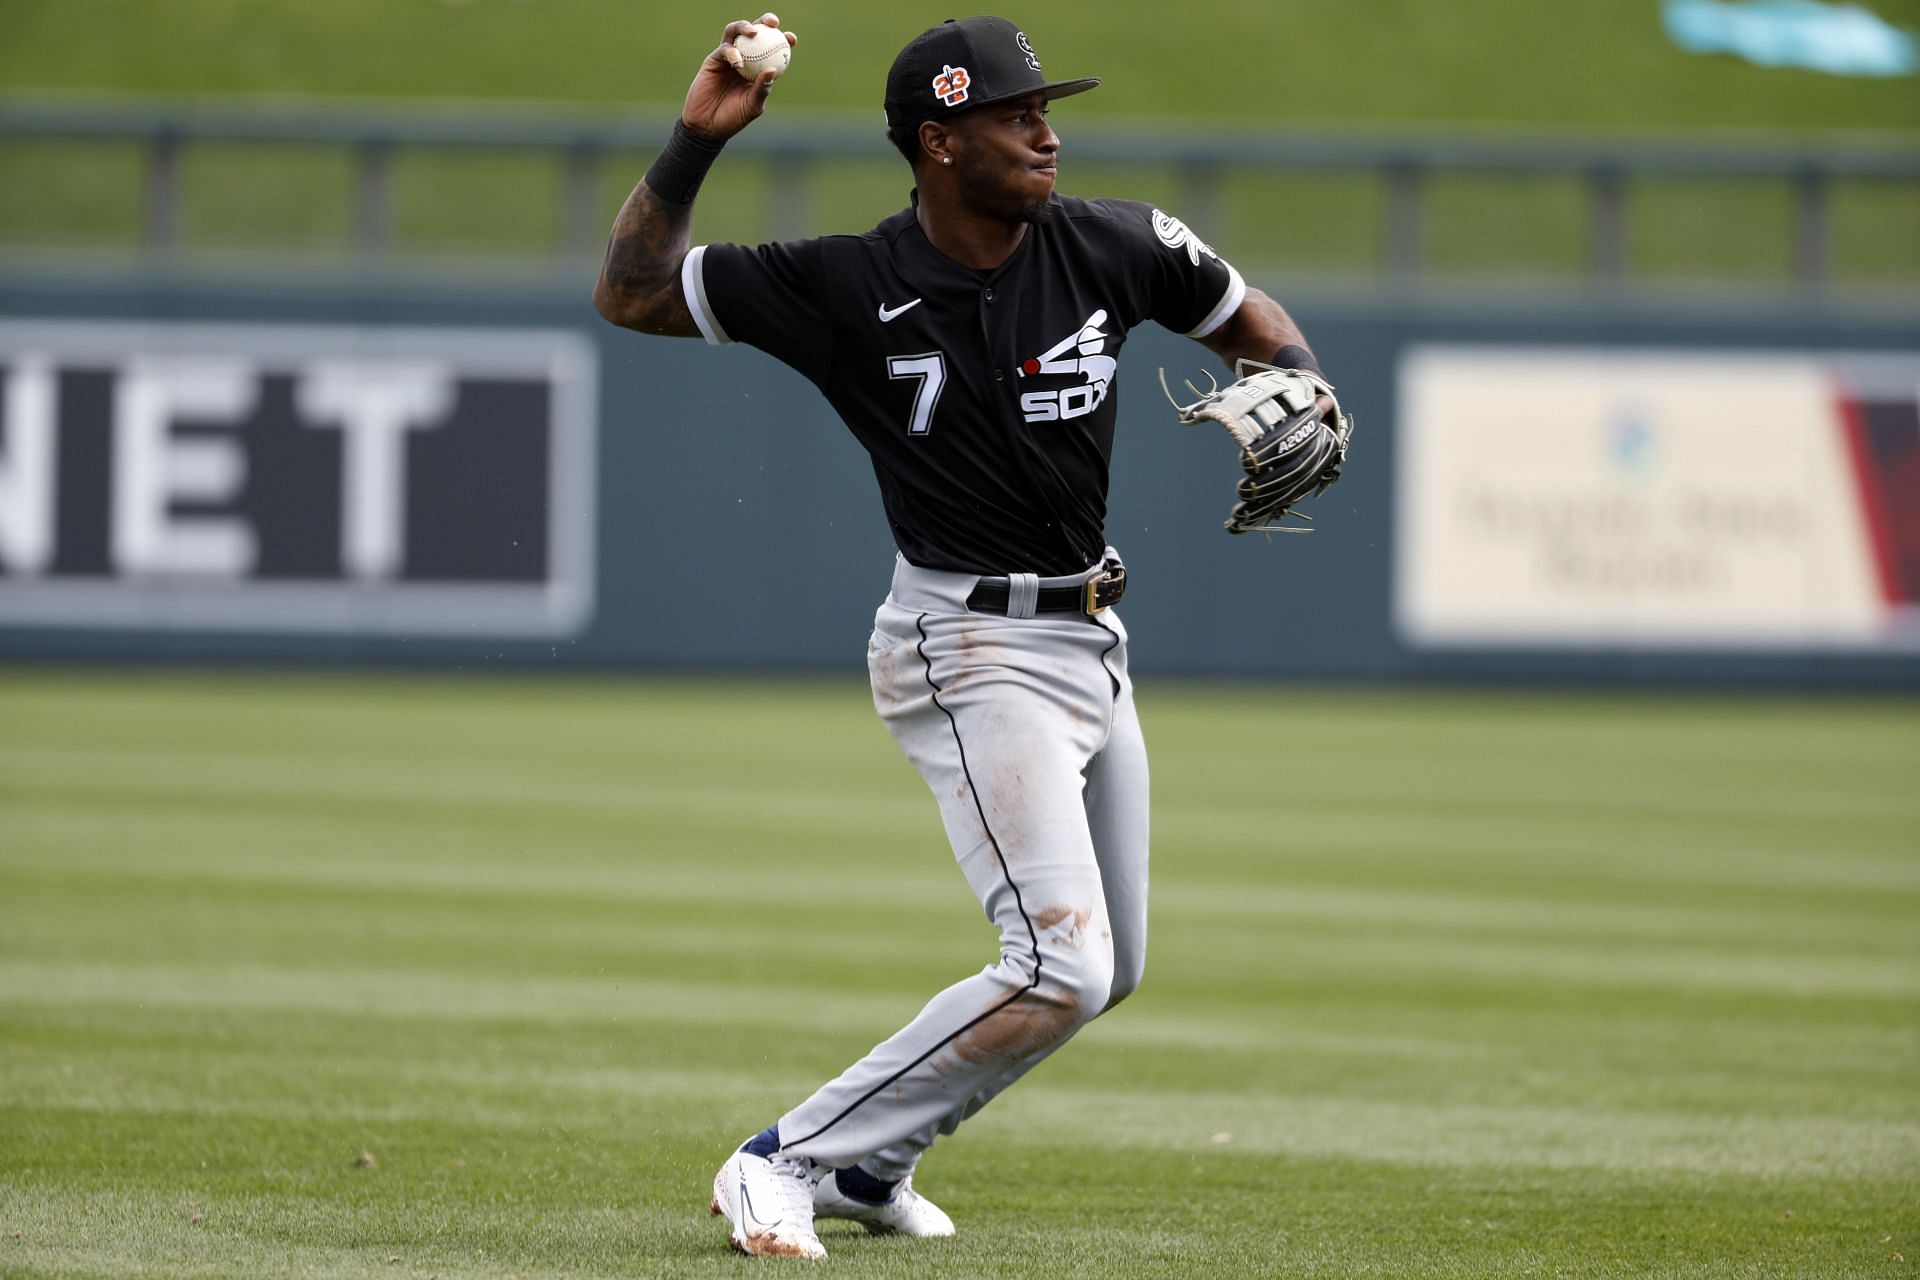 Tim Anderson of the Chicago White Sox throws to first.